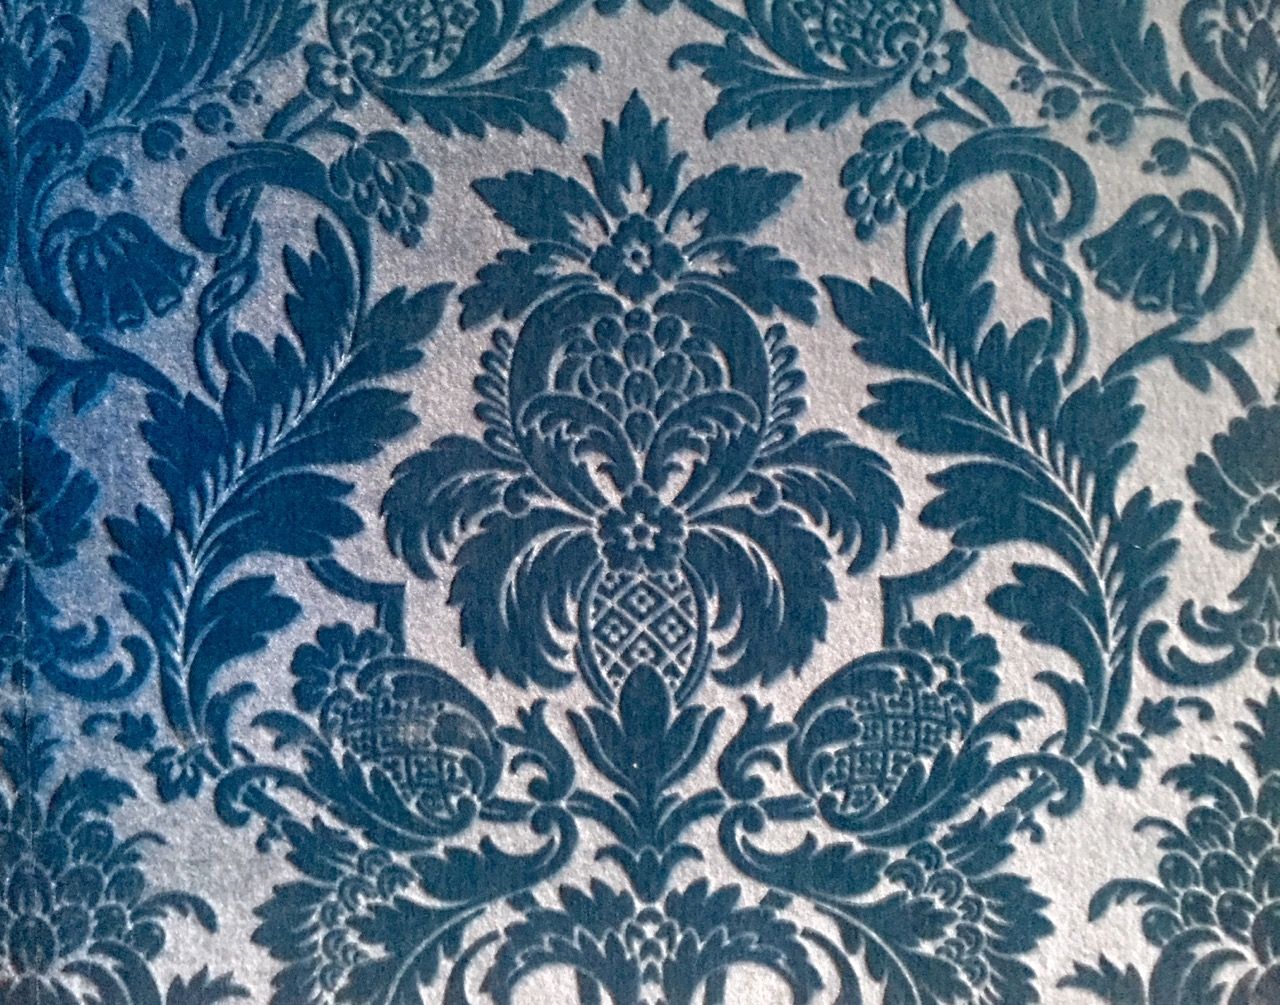 A blue carpeted wallpaper.